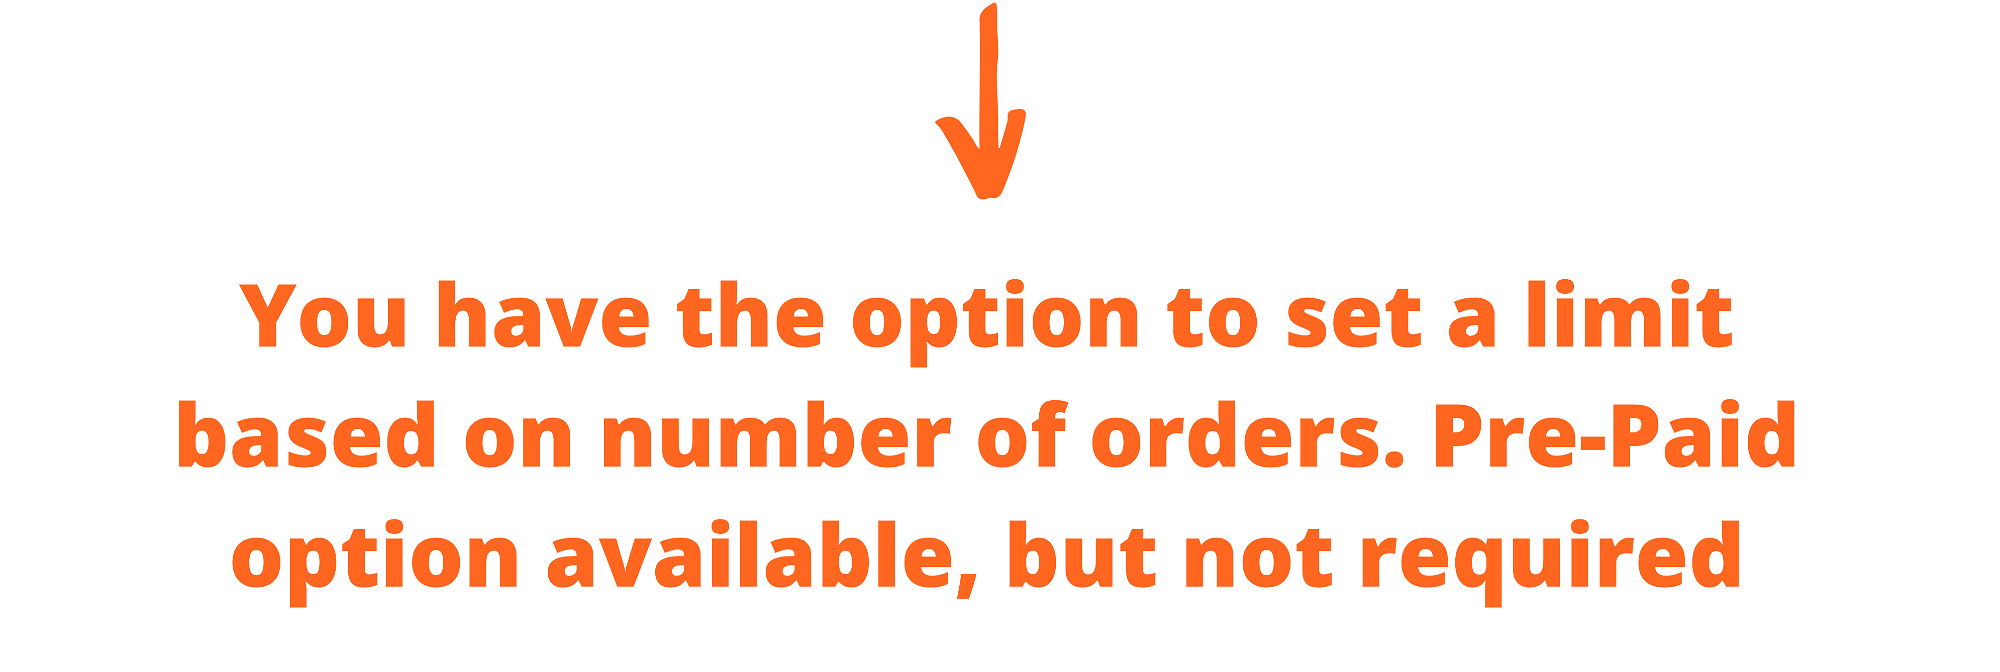 you have the option to set a limit based on number of orders. Pre-paid option available, but not required.